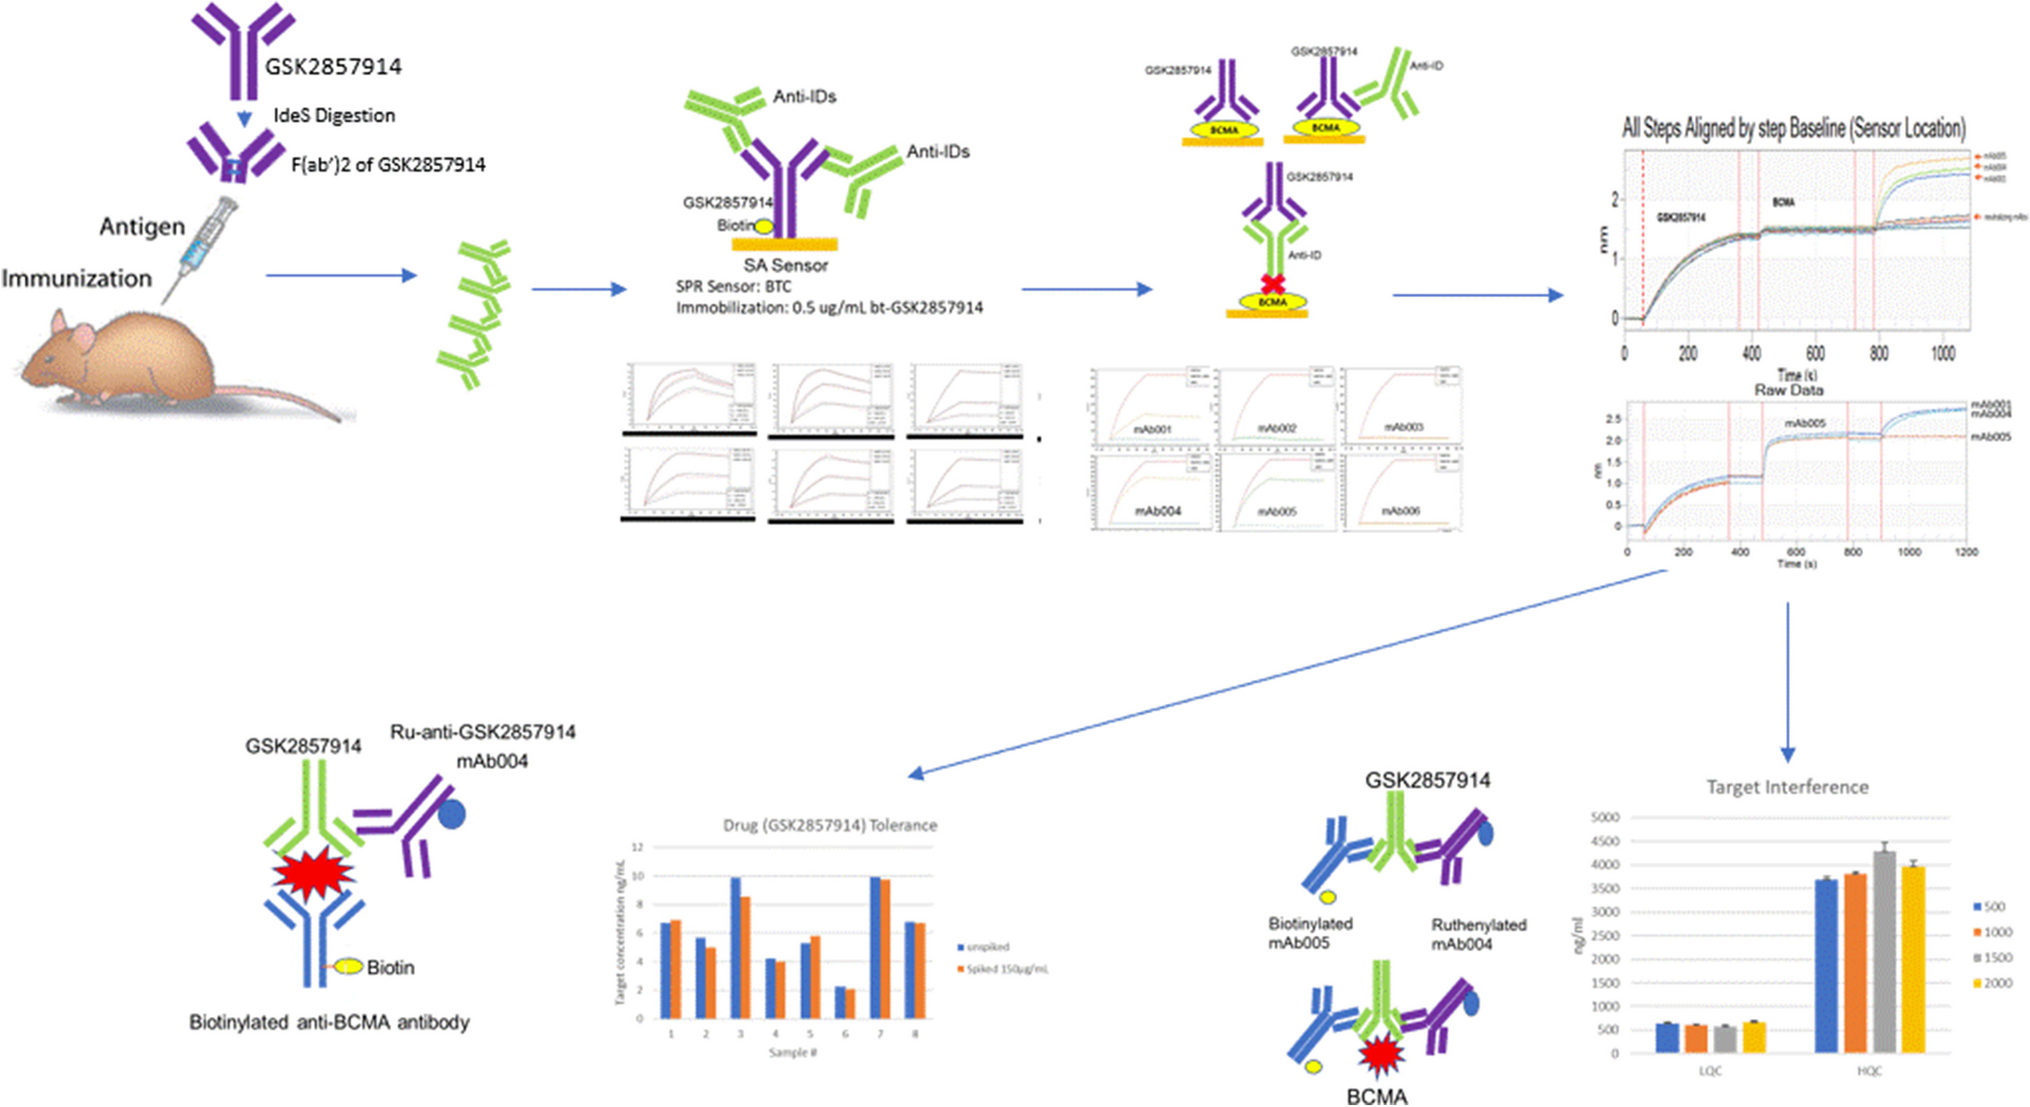 Screening Non-neutralizing Anti-idiotype Antibodies Against a Drug Candidate for Total Pharmacokinetic and Target Engagement Assay